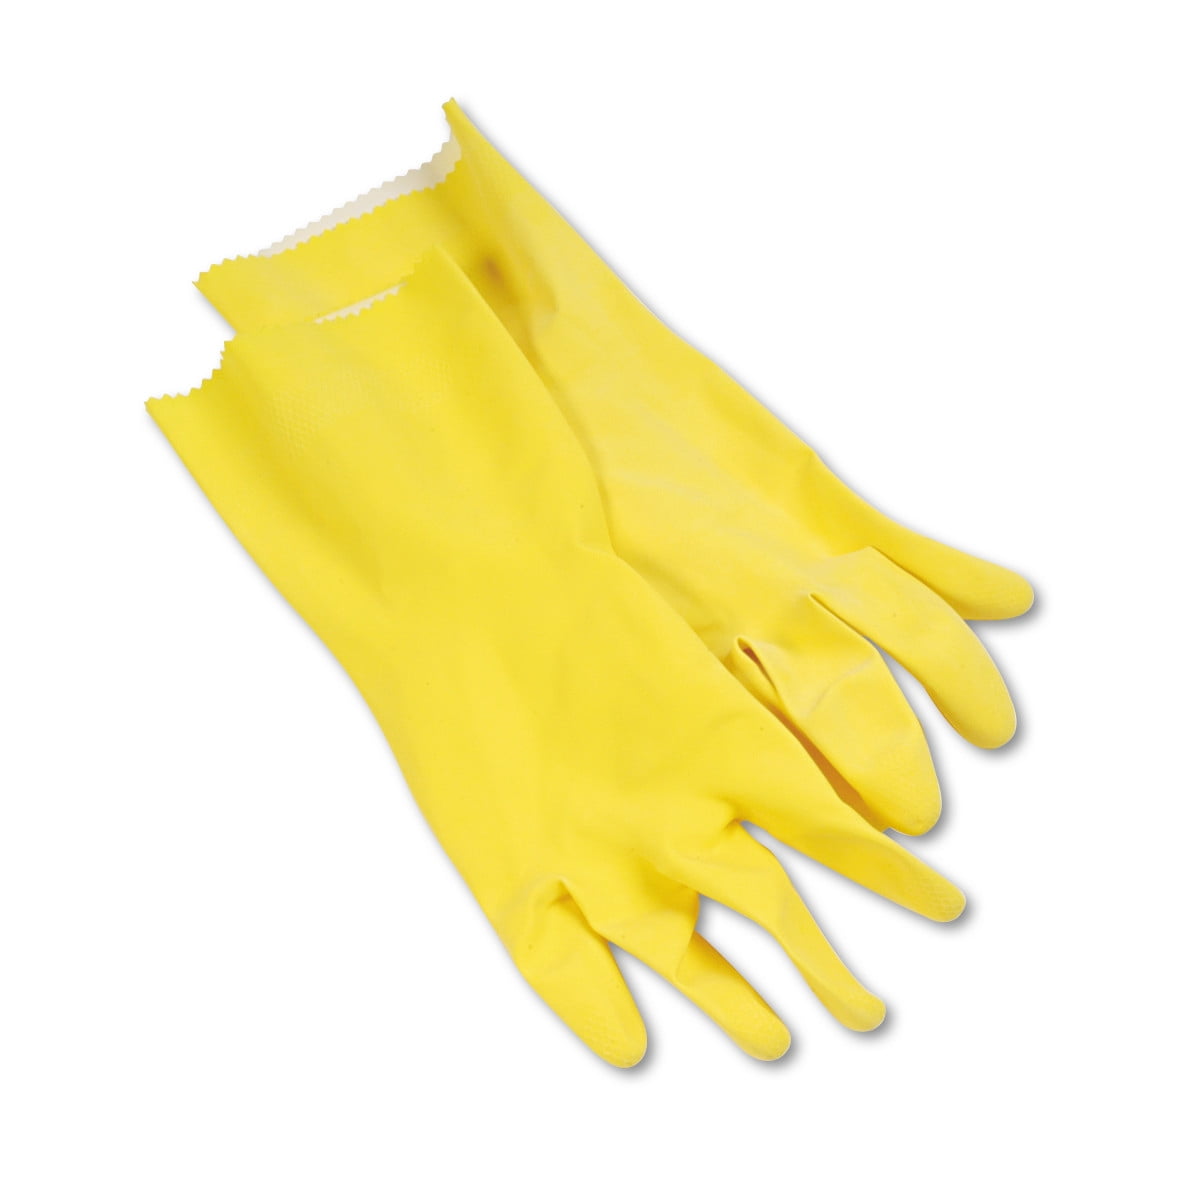 Flock Lined Natural Rubber GlovesIdeal for Household Cleaning Tasks 5 Pairs 